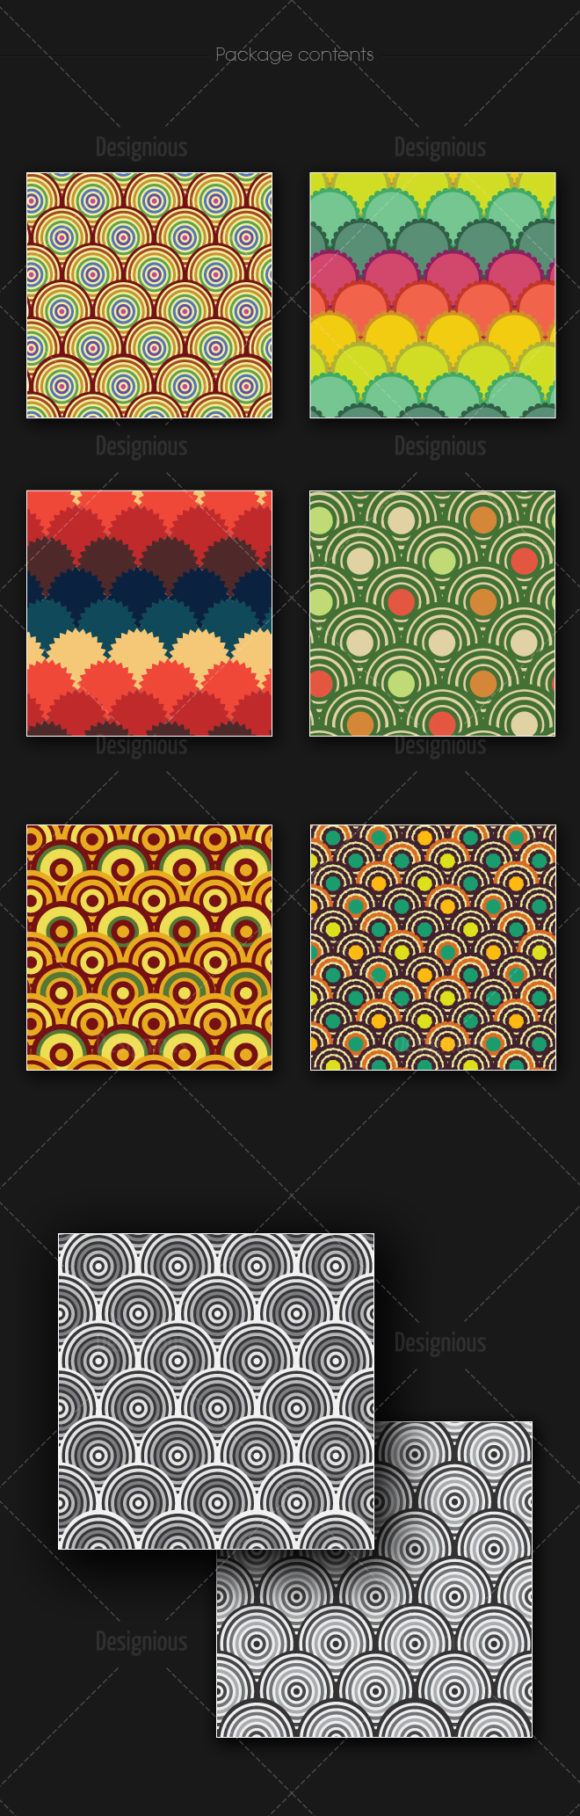 Seamless Patterns Vector Pack 163 2